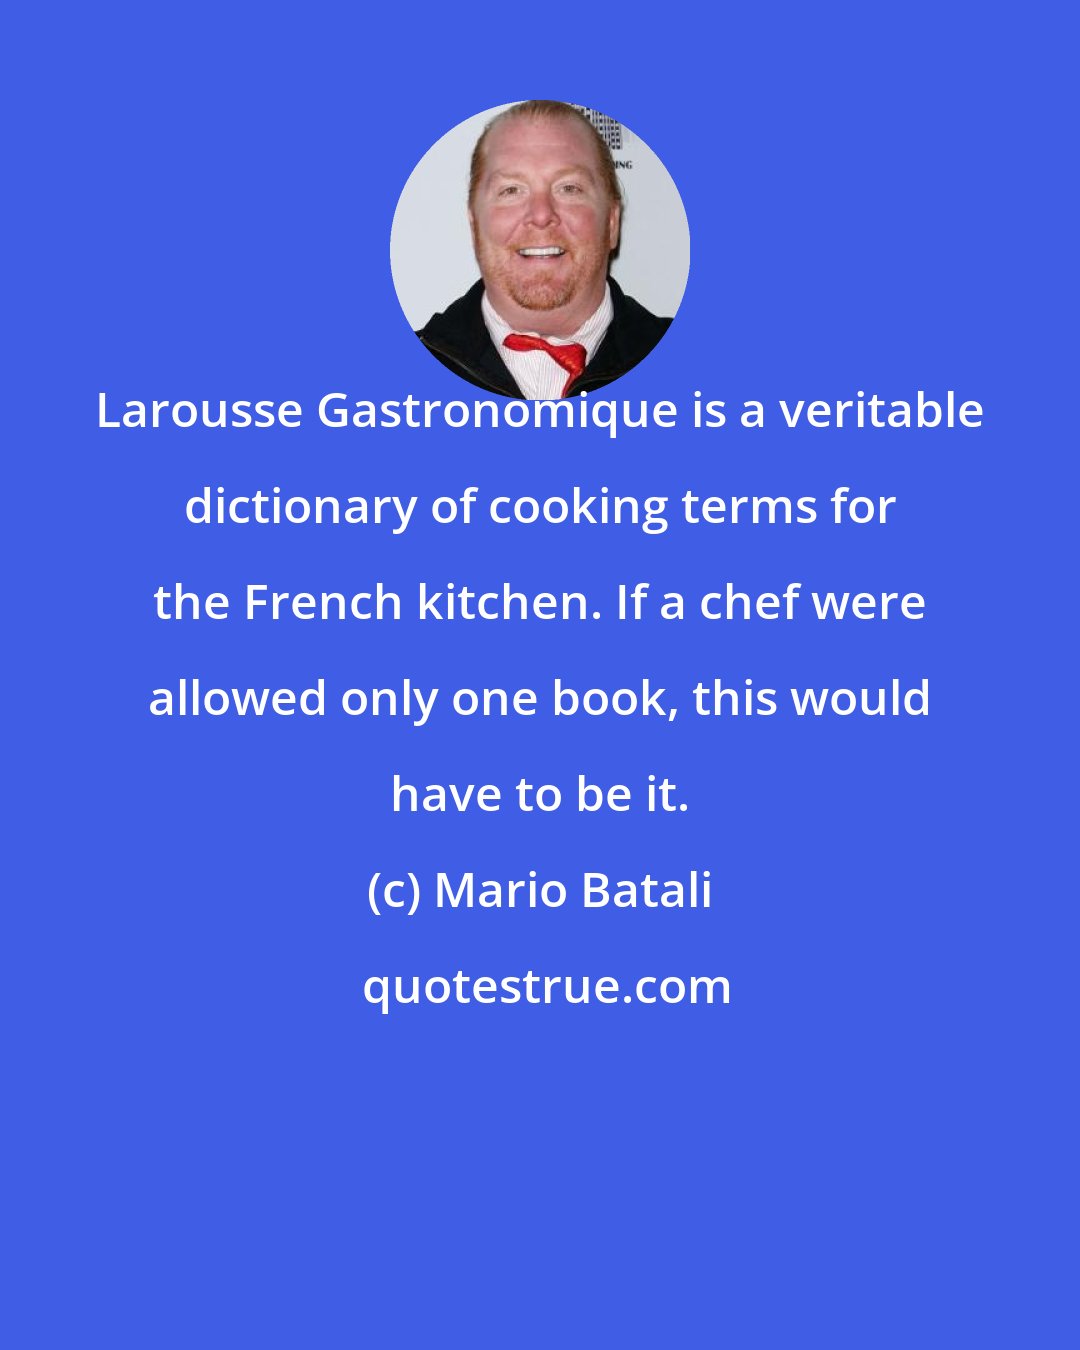 Mario Batali: Larousse Gastronomique is a veritable dictionary of cooking terms for the French kitchen. If a chef were allowed only one book, this would have to be it.